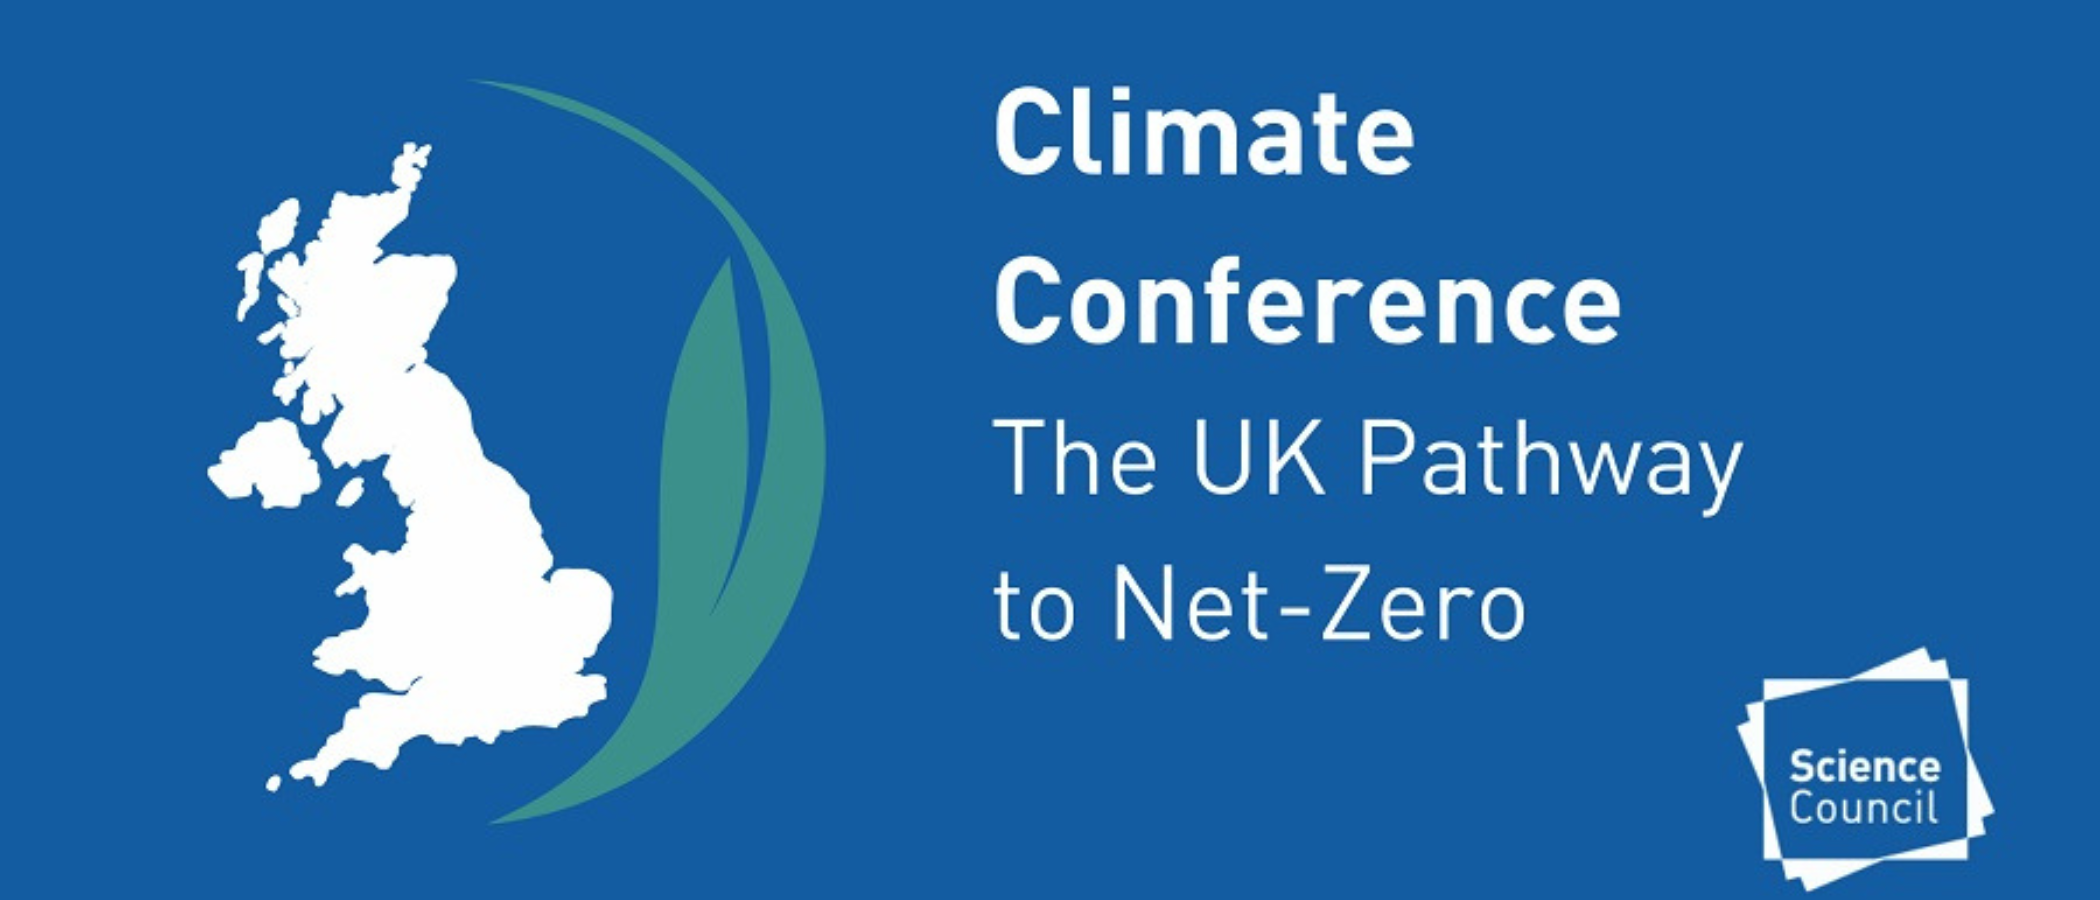 The text Climate Conference - The UK Pathway to Net-Zero with the event logo